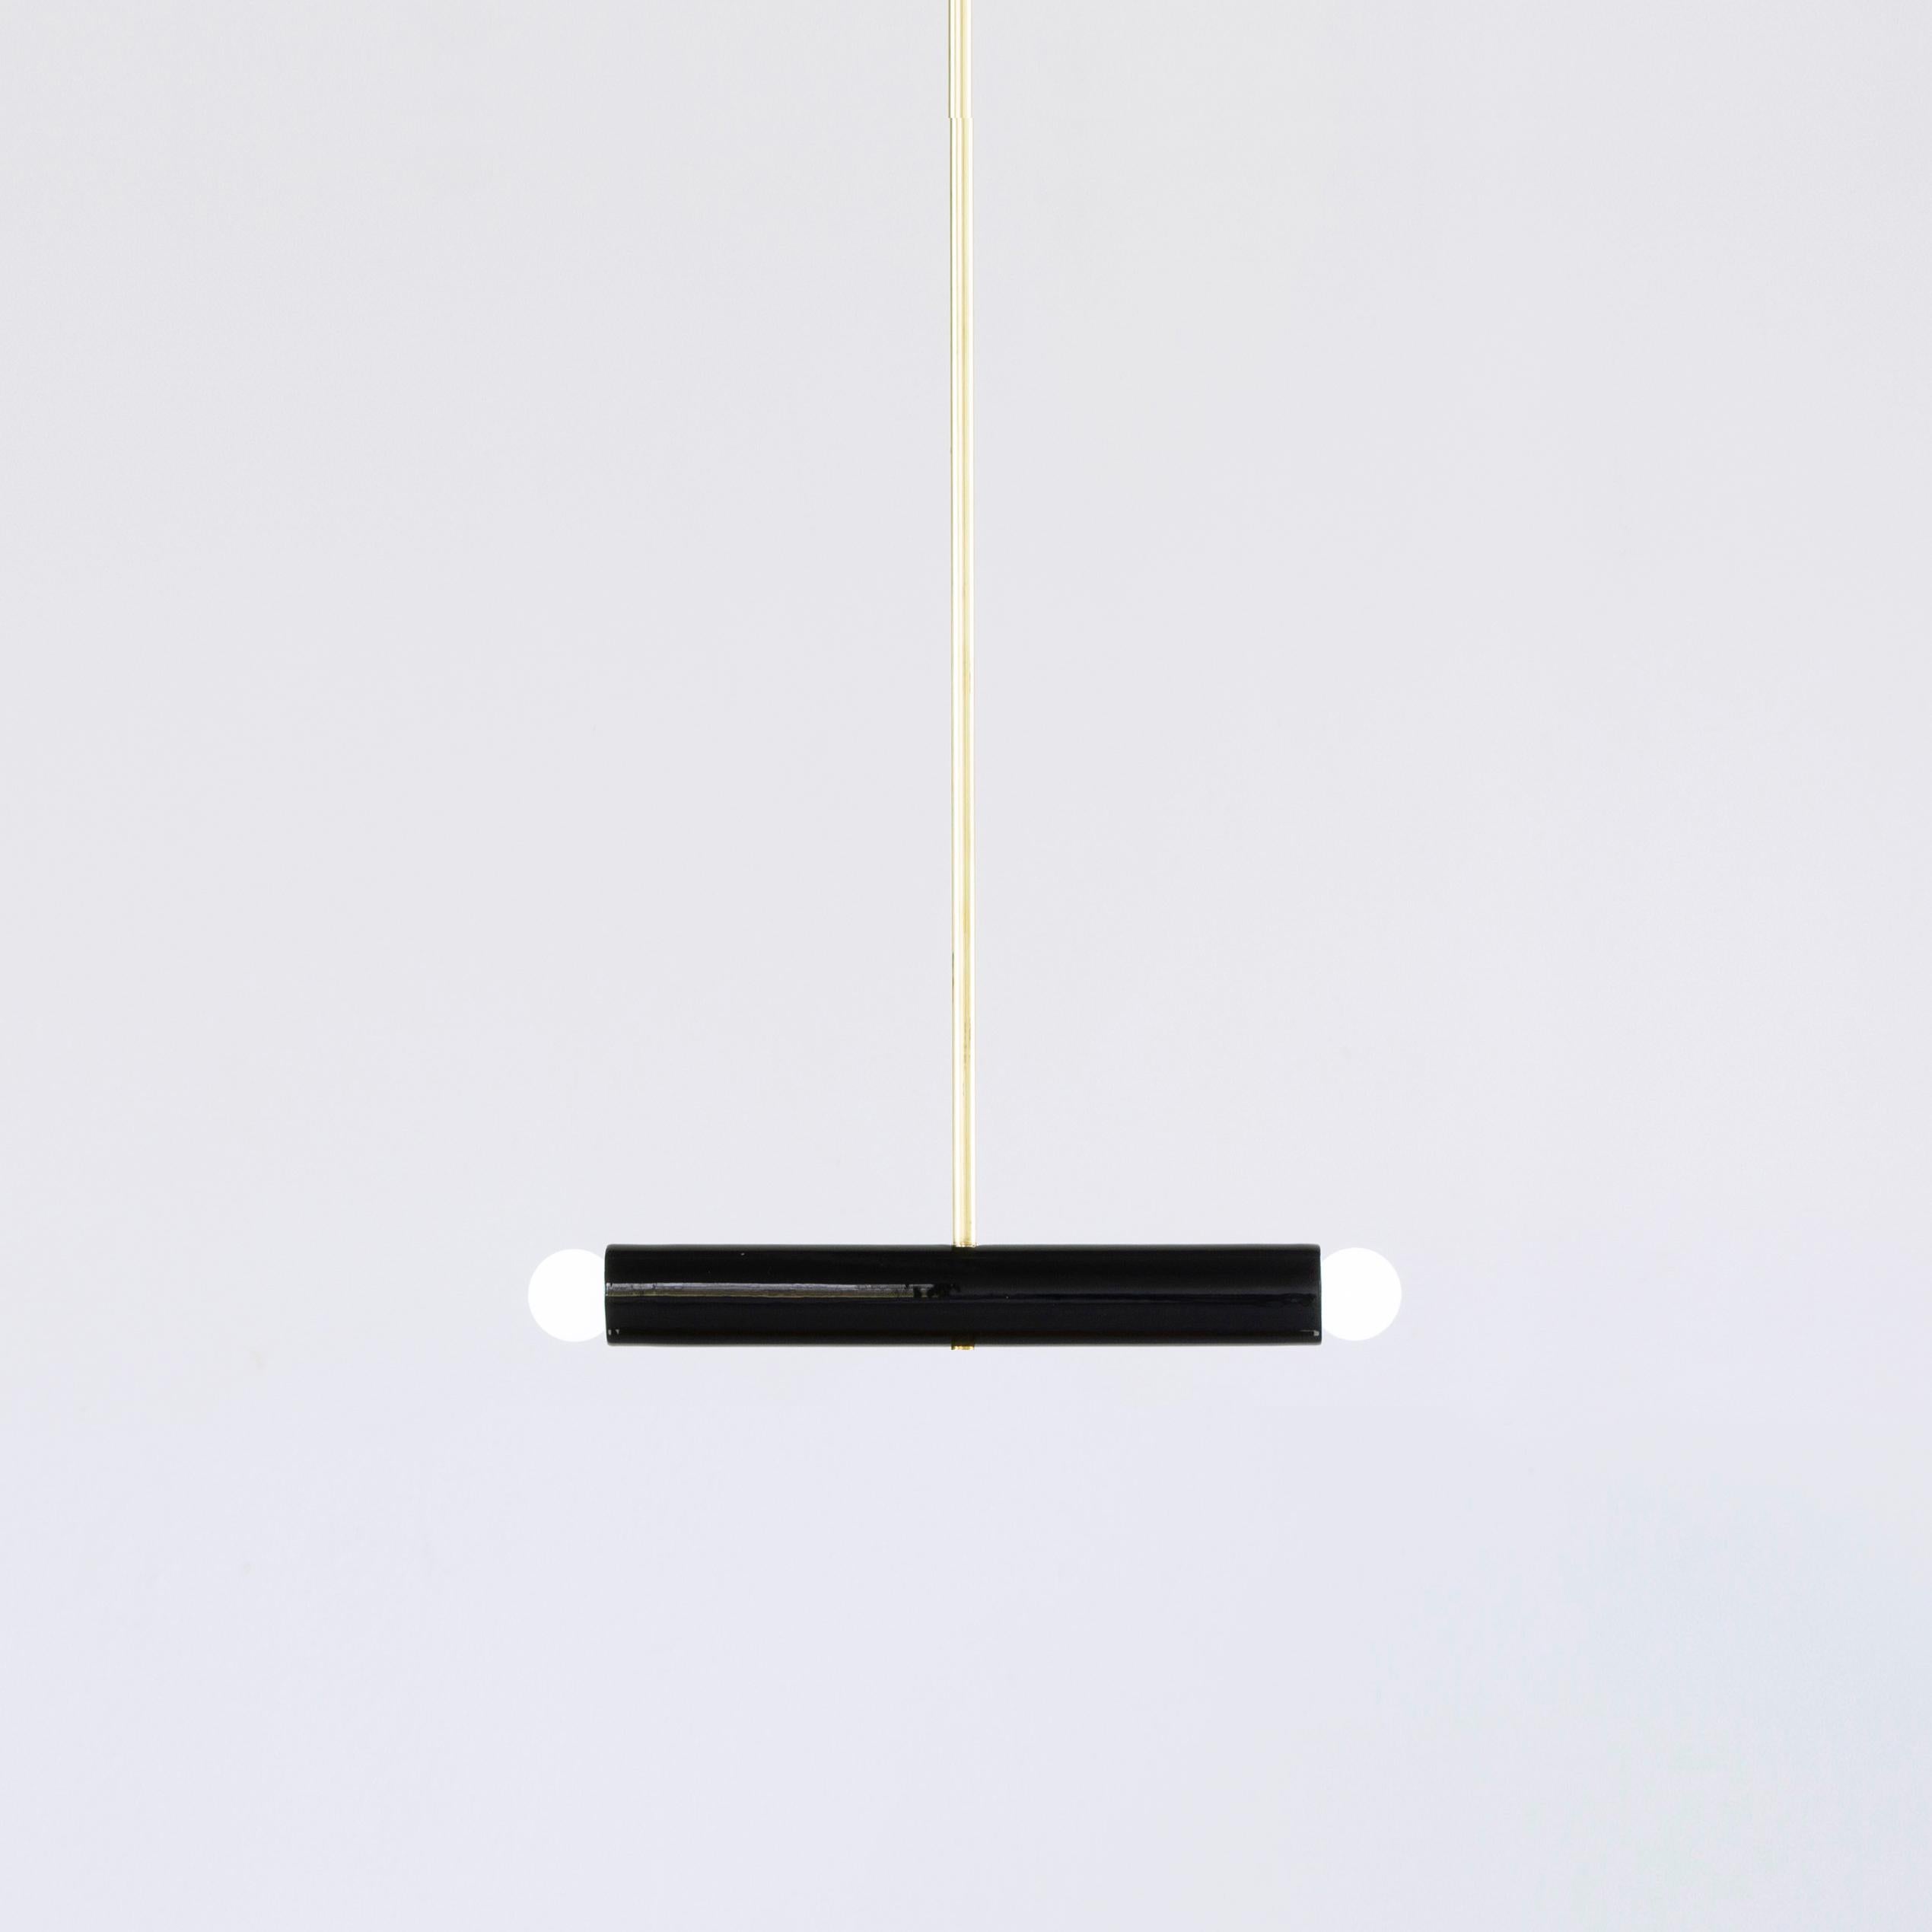 Black TRN A2 pendant lamp by Pani Jurek
Dimensions: D 5 x W 35 x H 5 cm 
Material: Hand glazed ceramic and brass.
Available in other colors.
Lamps from the TRN collection hang on a metal tube, not on a cable. This allows the lamp to be mounted in a